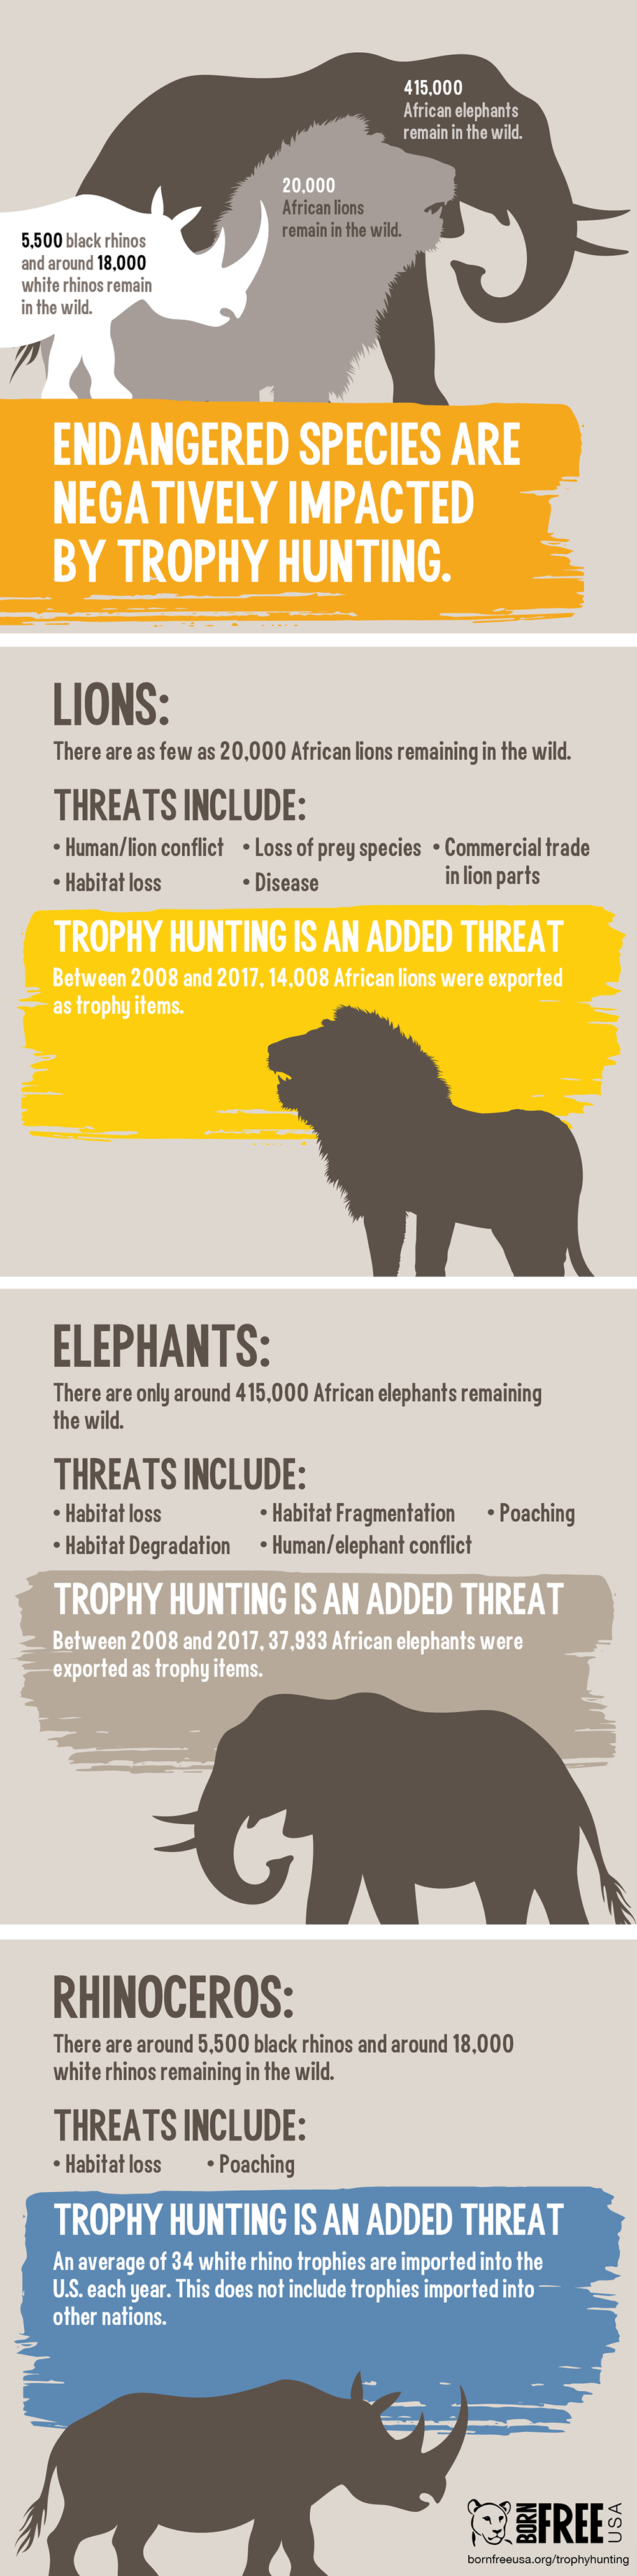 GRAPHIC: Endangered Species Are Negatively Impacted by Trophy Hunting |  Born Free USA